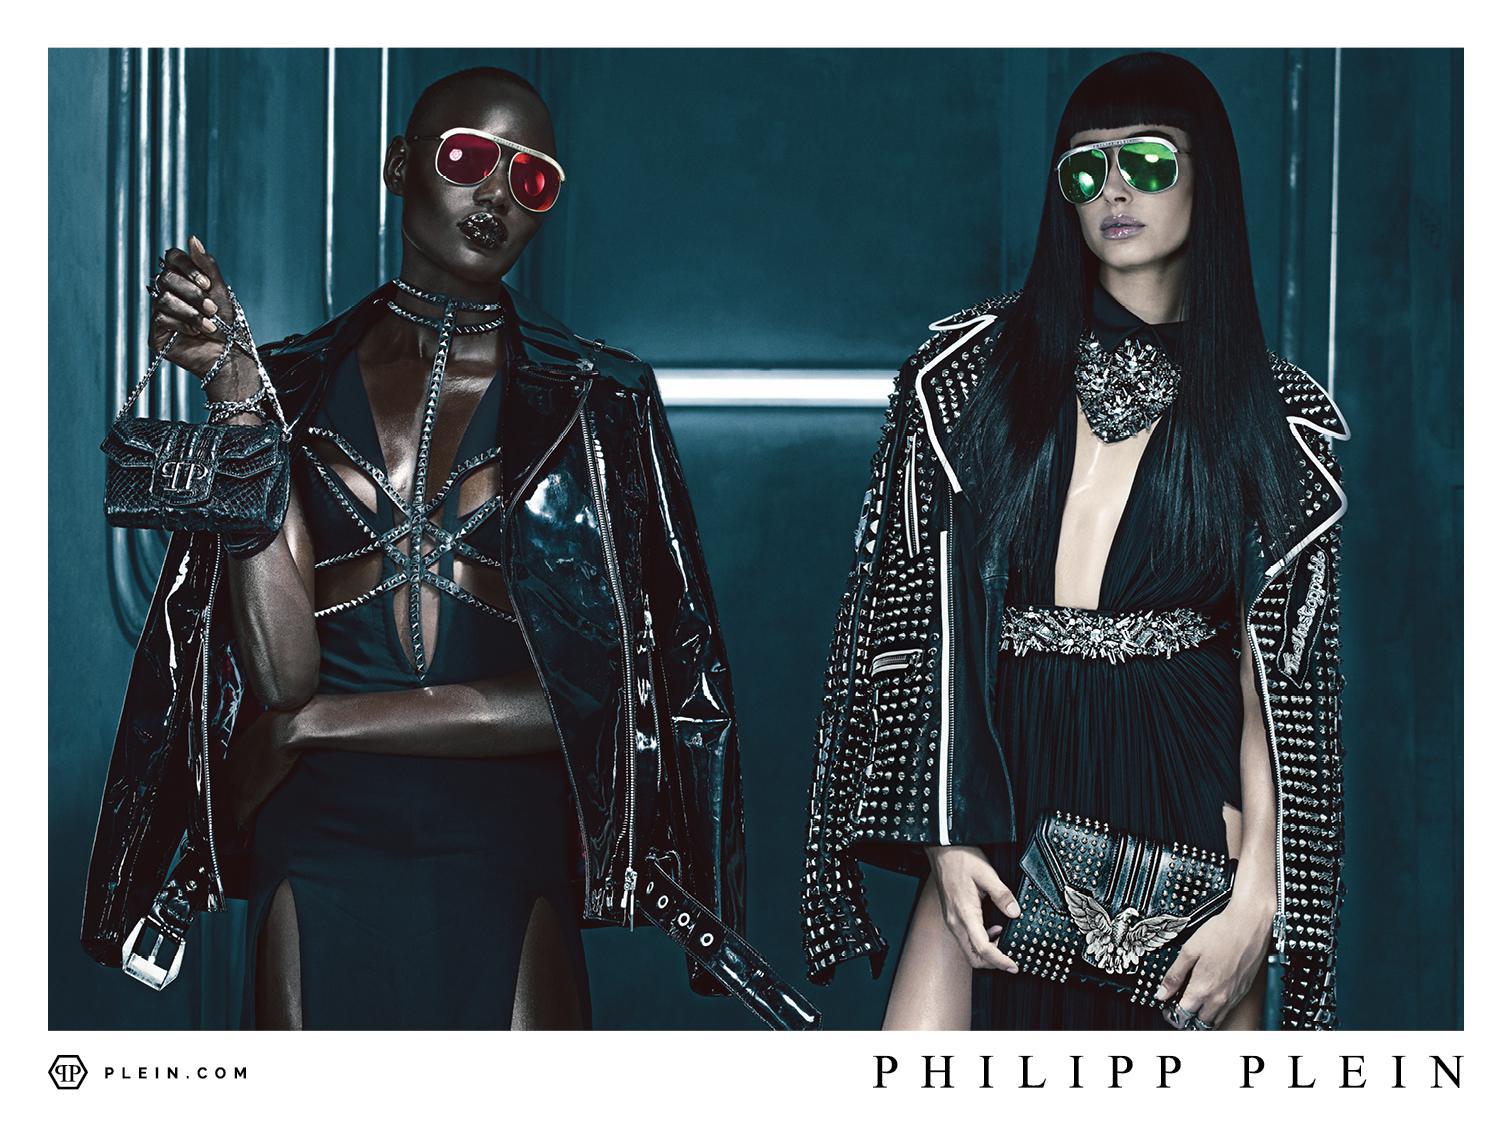 RETRO READ: Who is Philipp Plein and How Does His Brand Make Any